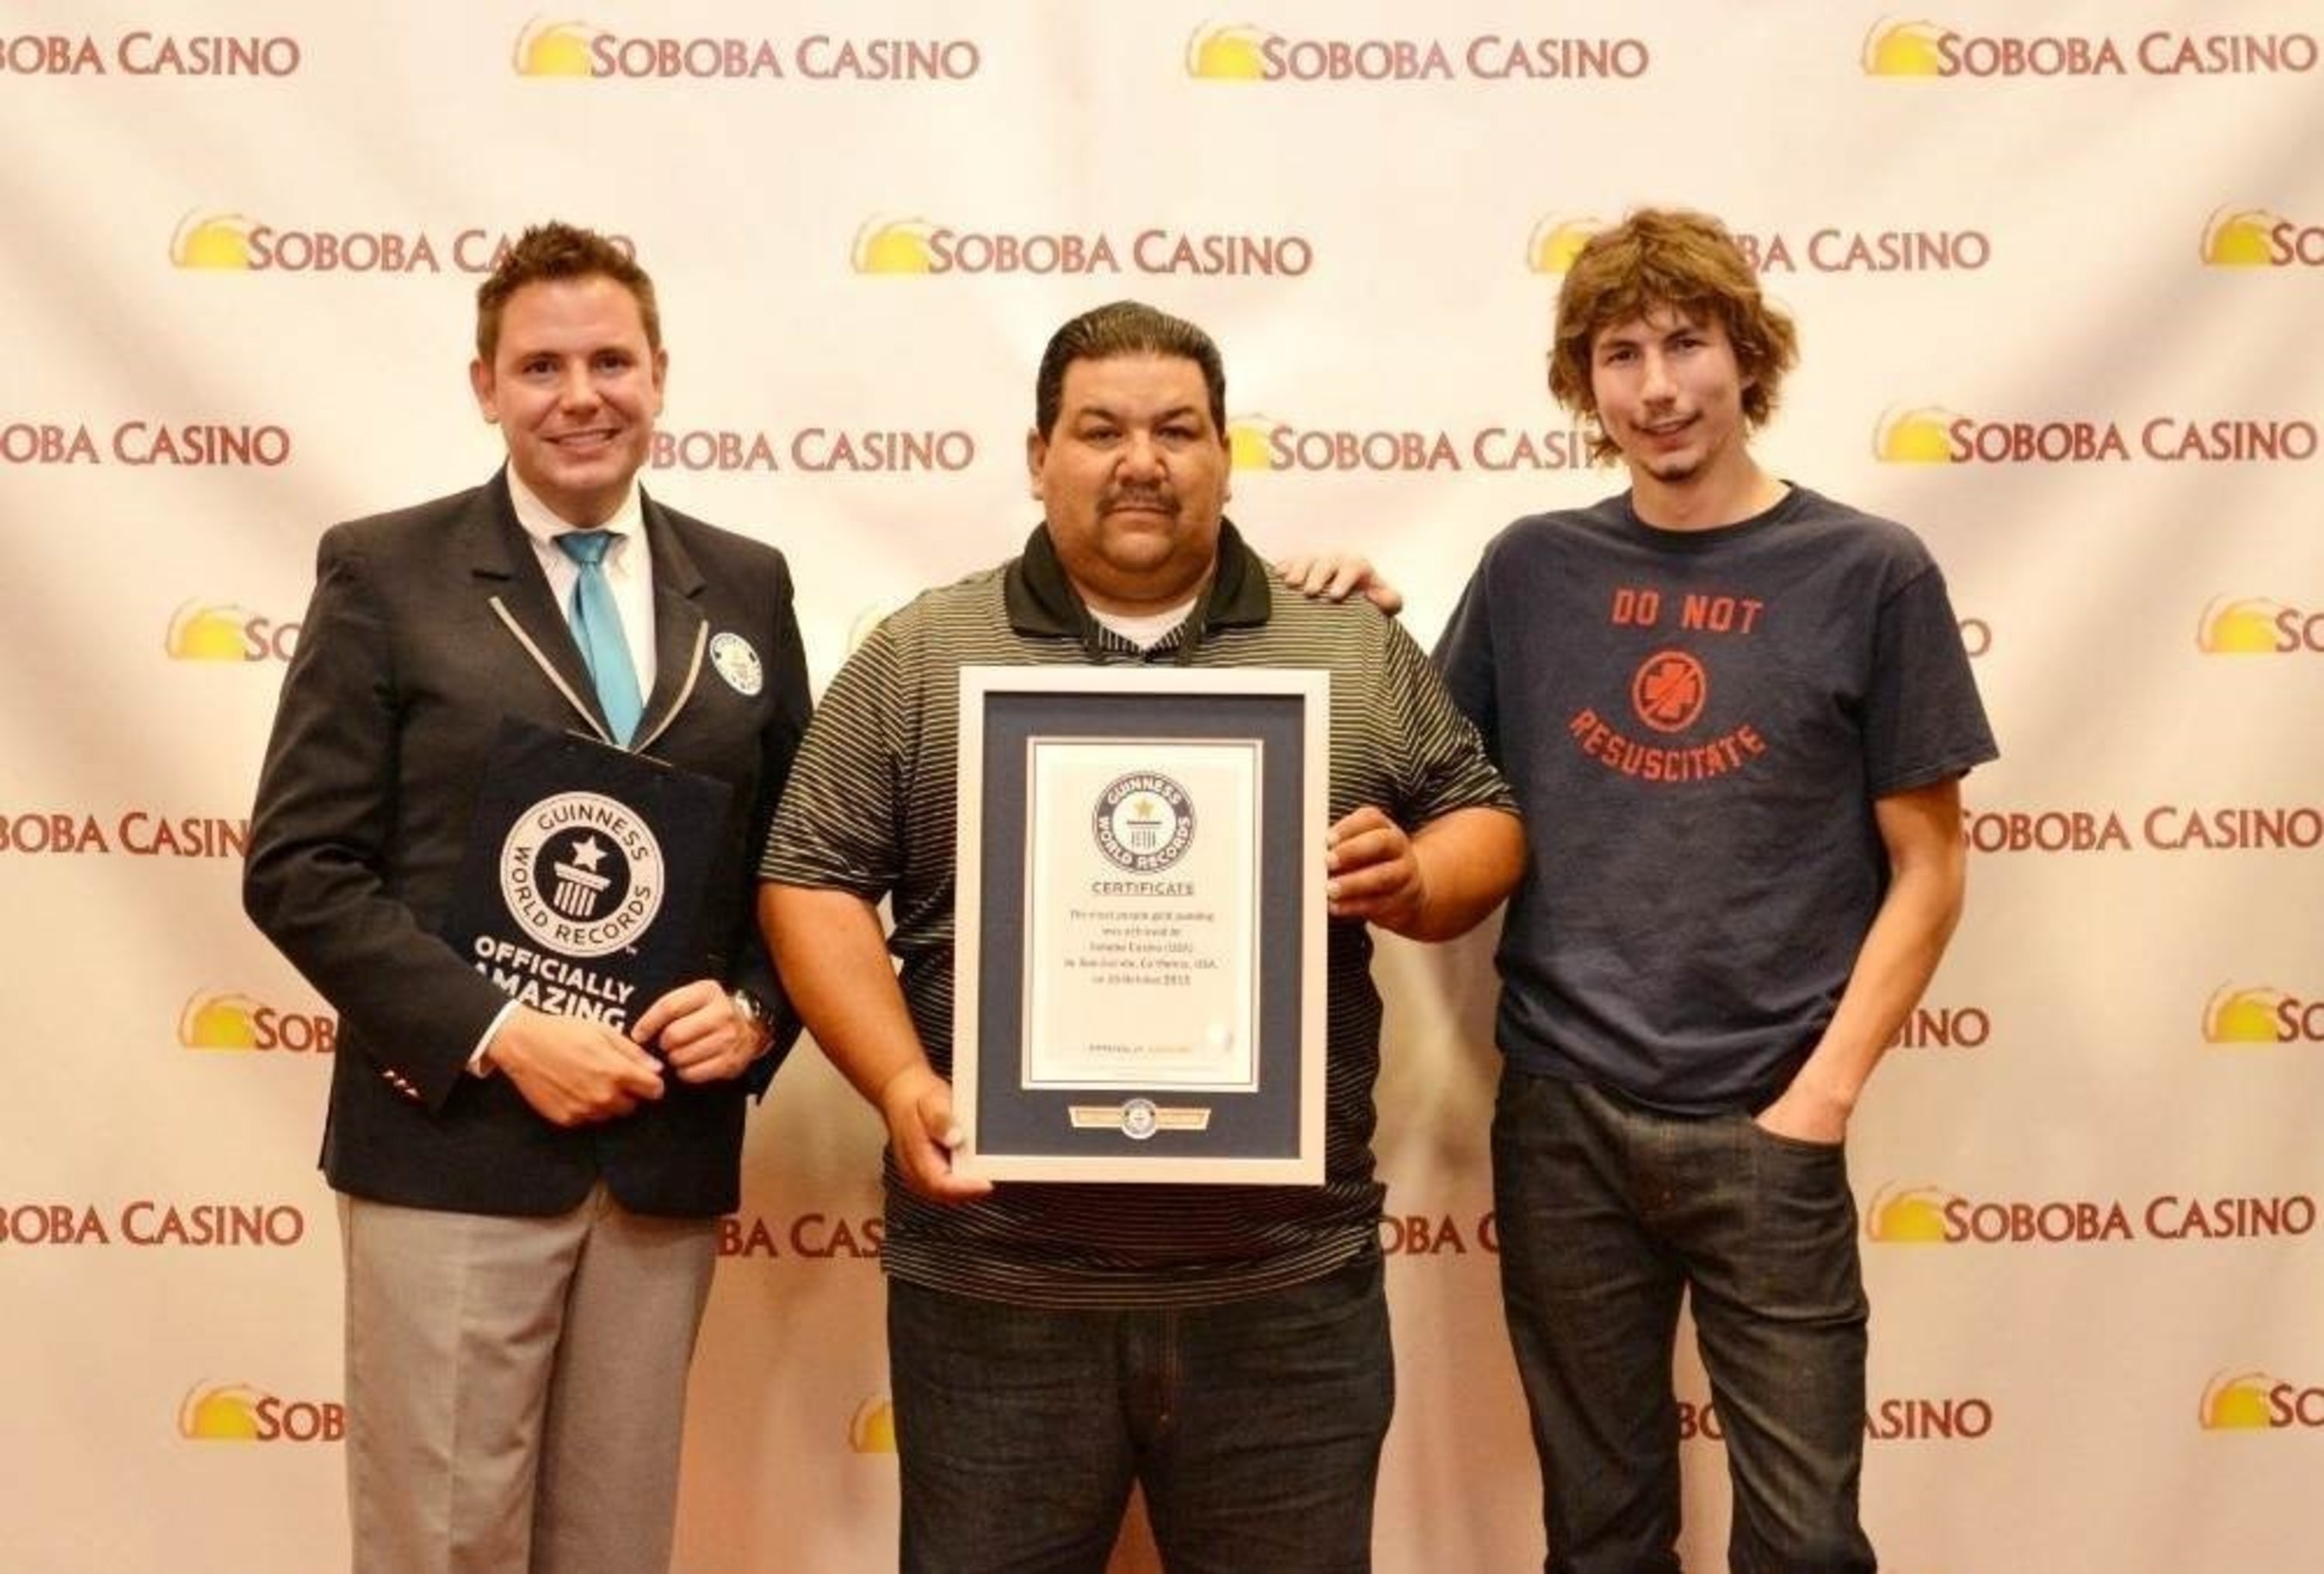 Guinness Book of world Records Michael Empric, Vice-Chair of Soboba Band of Luiseno Indians Tribal Council Isaiah Vivanco, and Star of Discovery Channel's Gold Rush Parker Schnable celebrate breaking a "Golden" World Record.